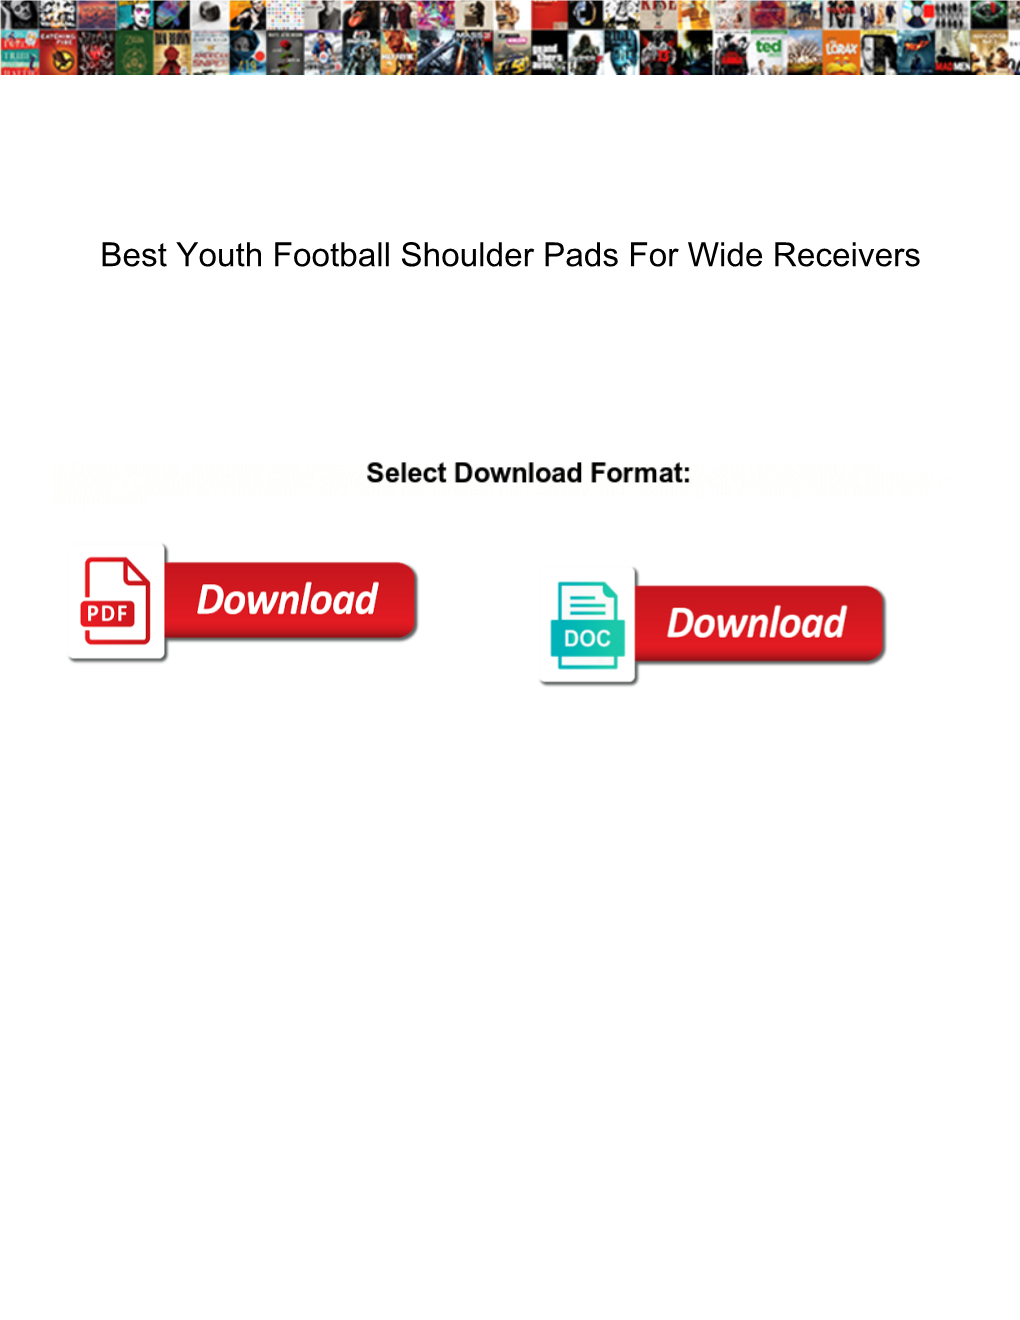 Best Youth Football Shoulder Pads for Wide Receivers